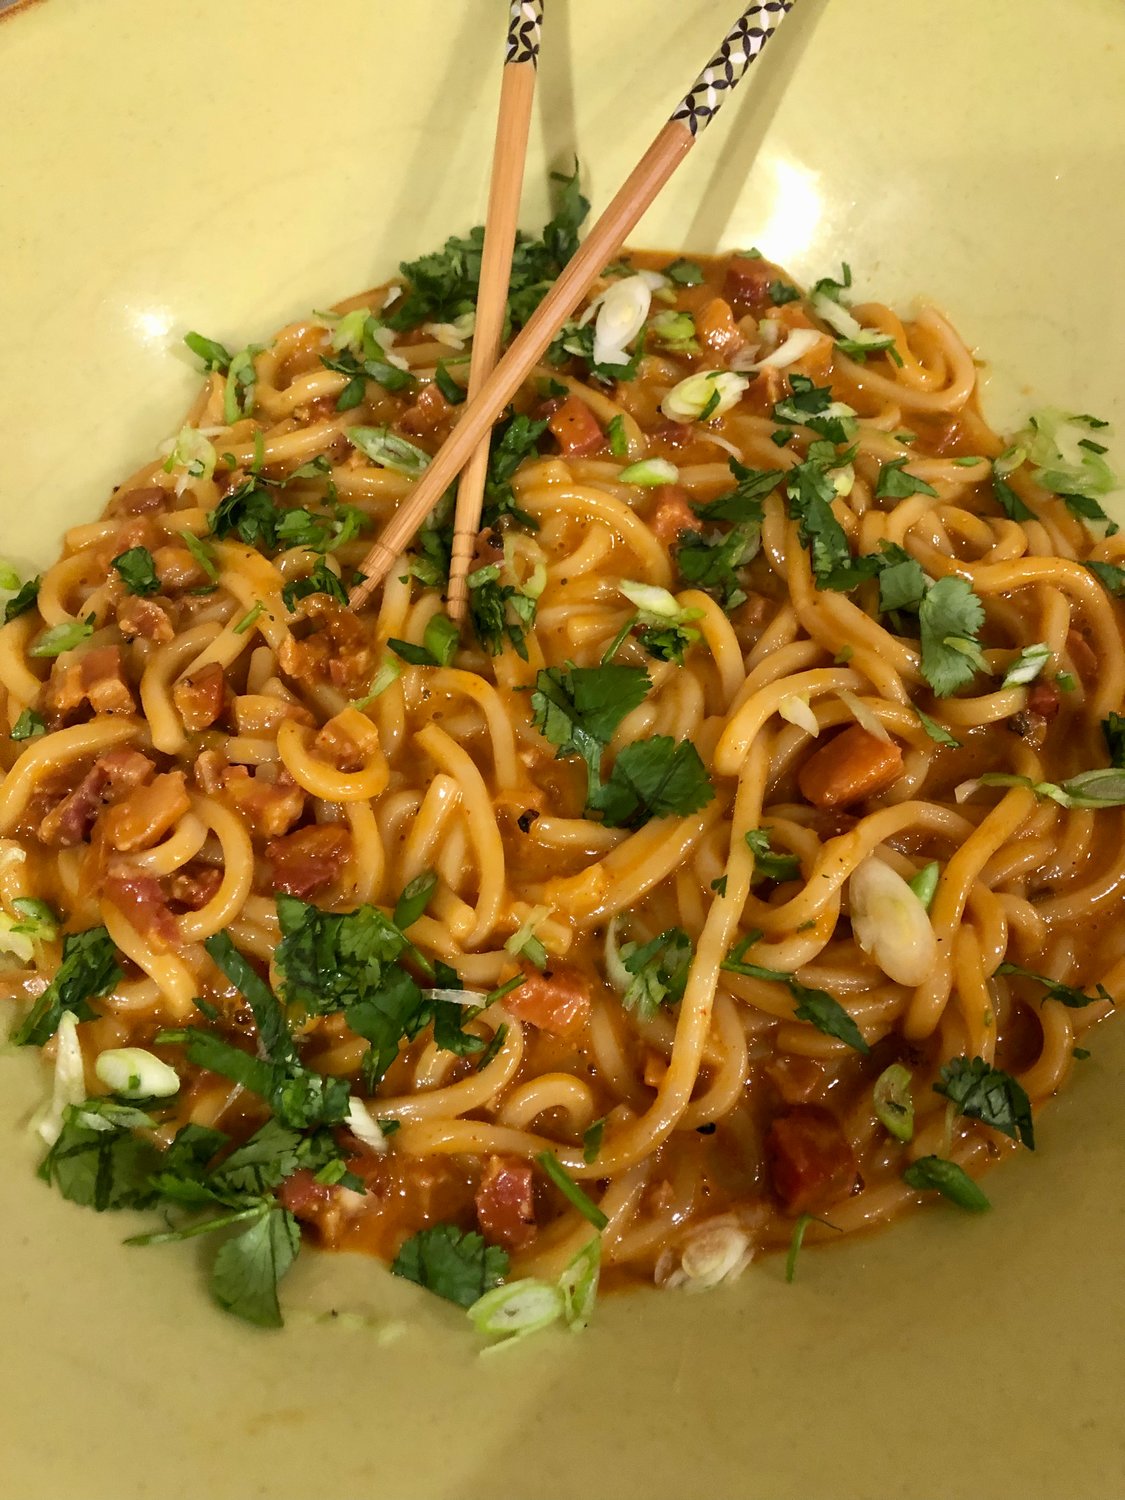 A tangle of Japanese Udon noodles is fragrant with spicy red chile gochujang paste, a common ingredient in South Korean cooking, available at Bartlett's.